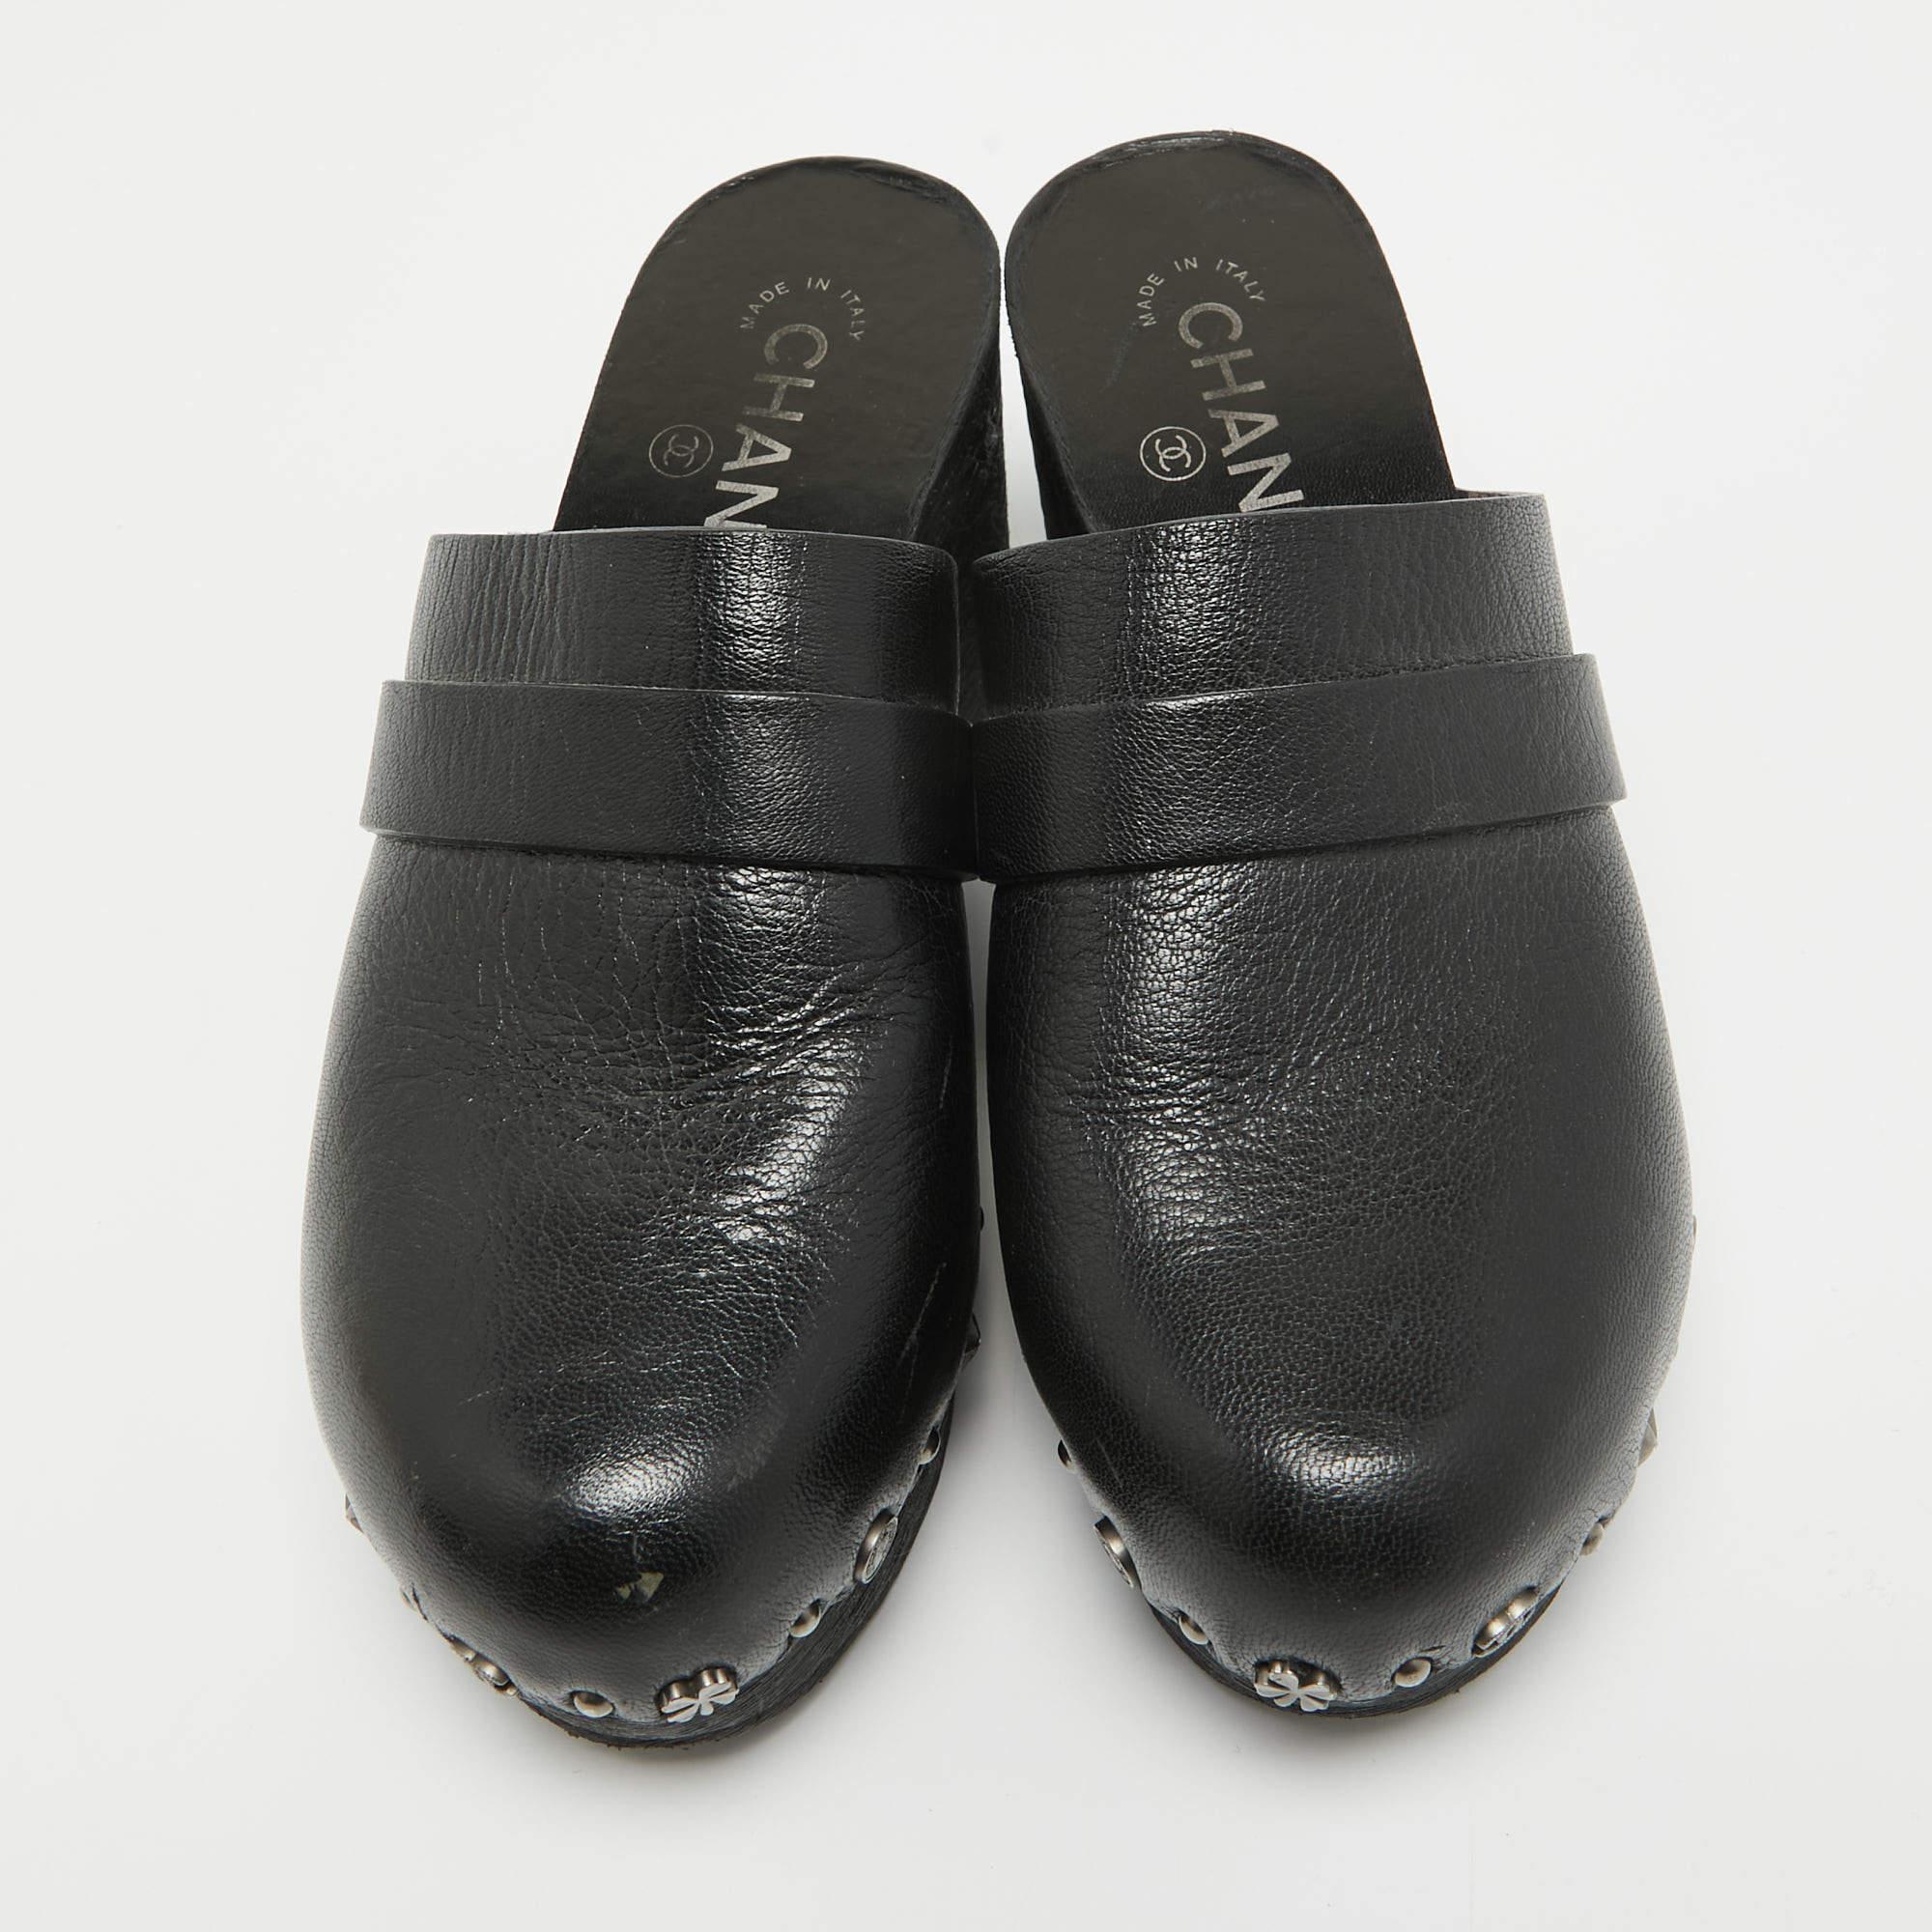 How stylish are these clogs from Chanel! They carry a black exterior made from fine leather and designed with studs, the CC logos, and platforms with block heels. The clogs are high in style and they are sure to delight your fashion